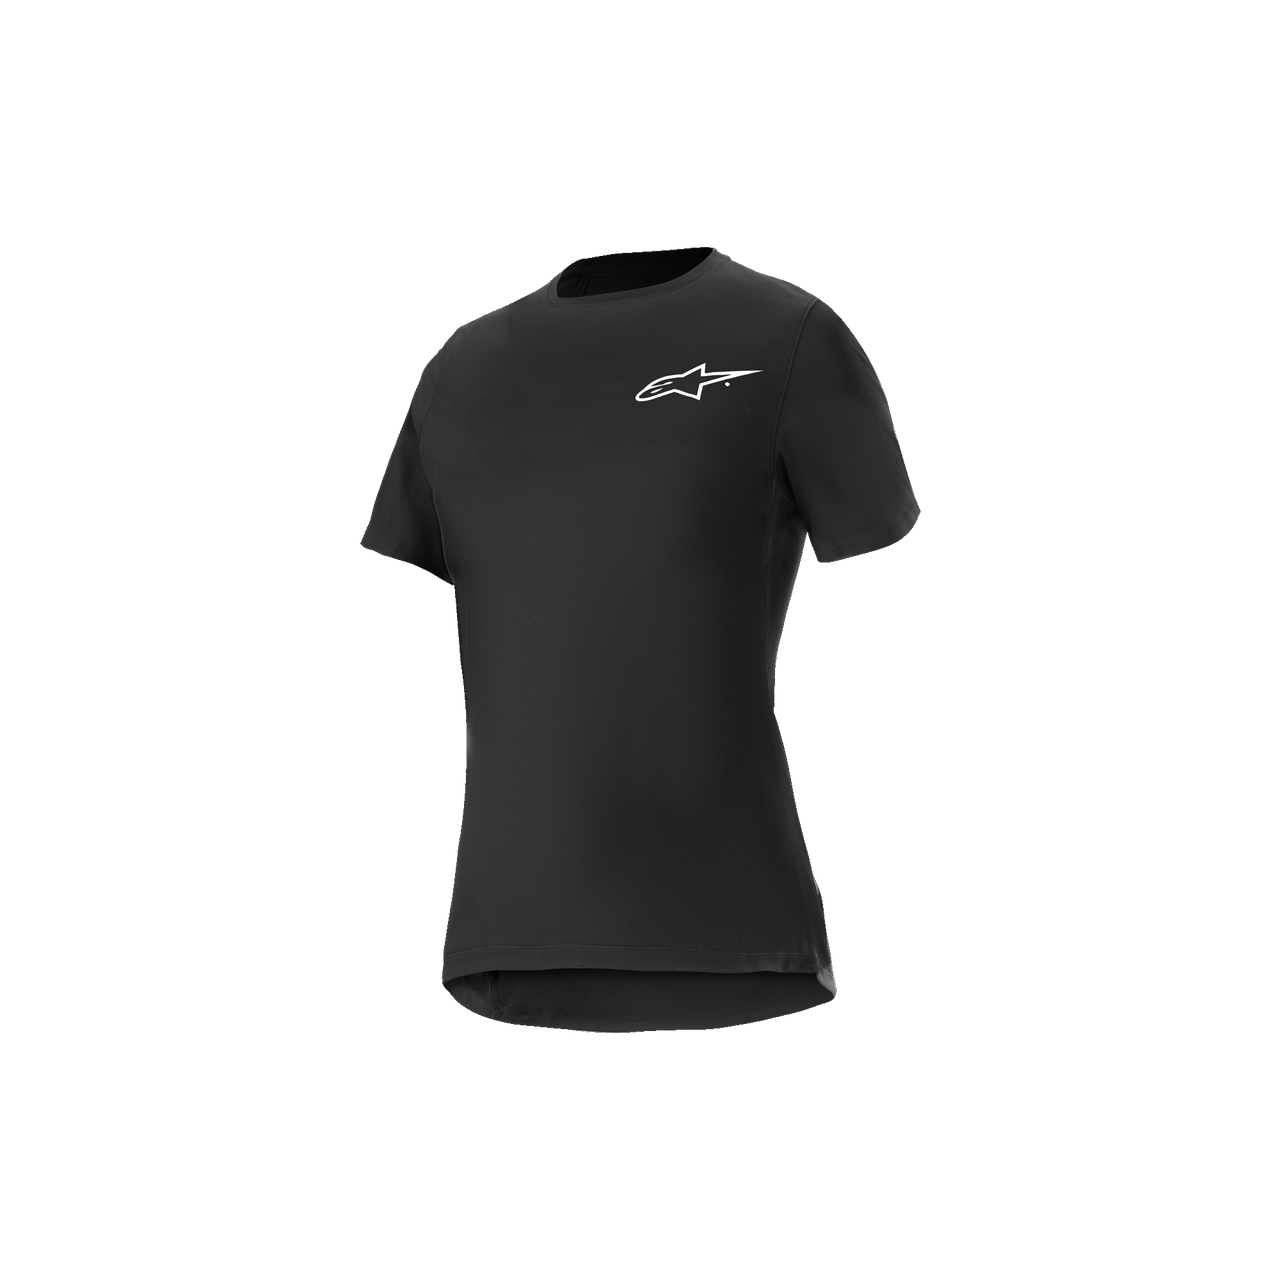 MTB Women's Collection